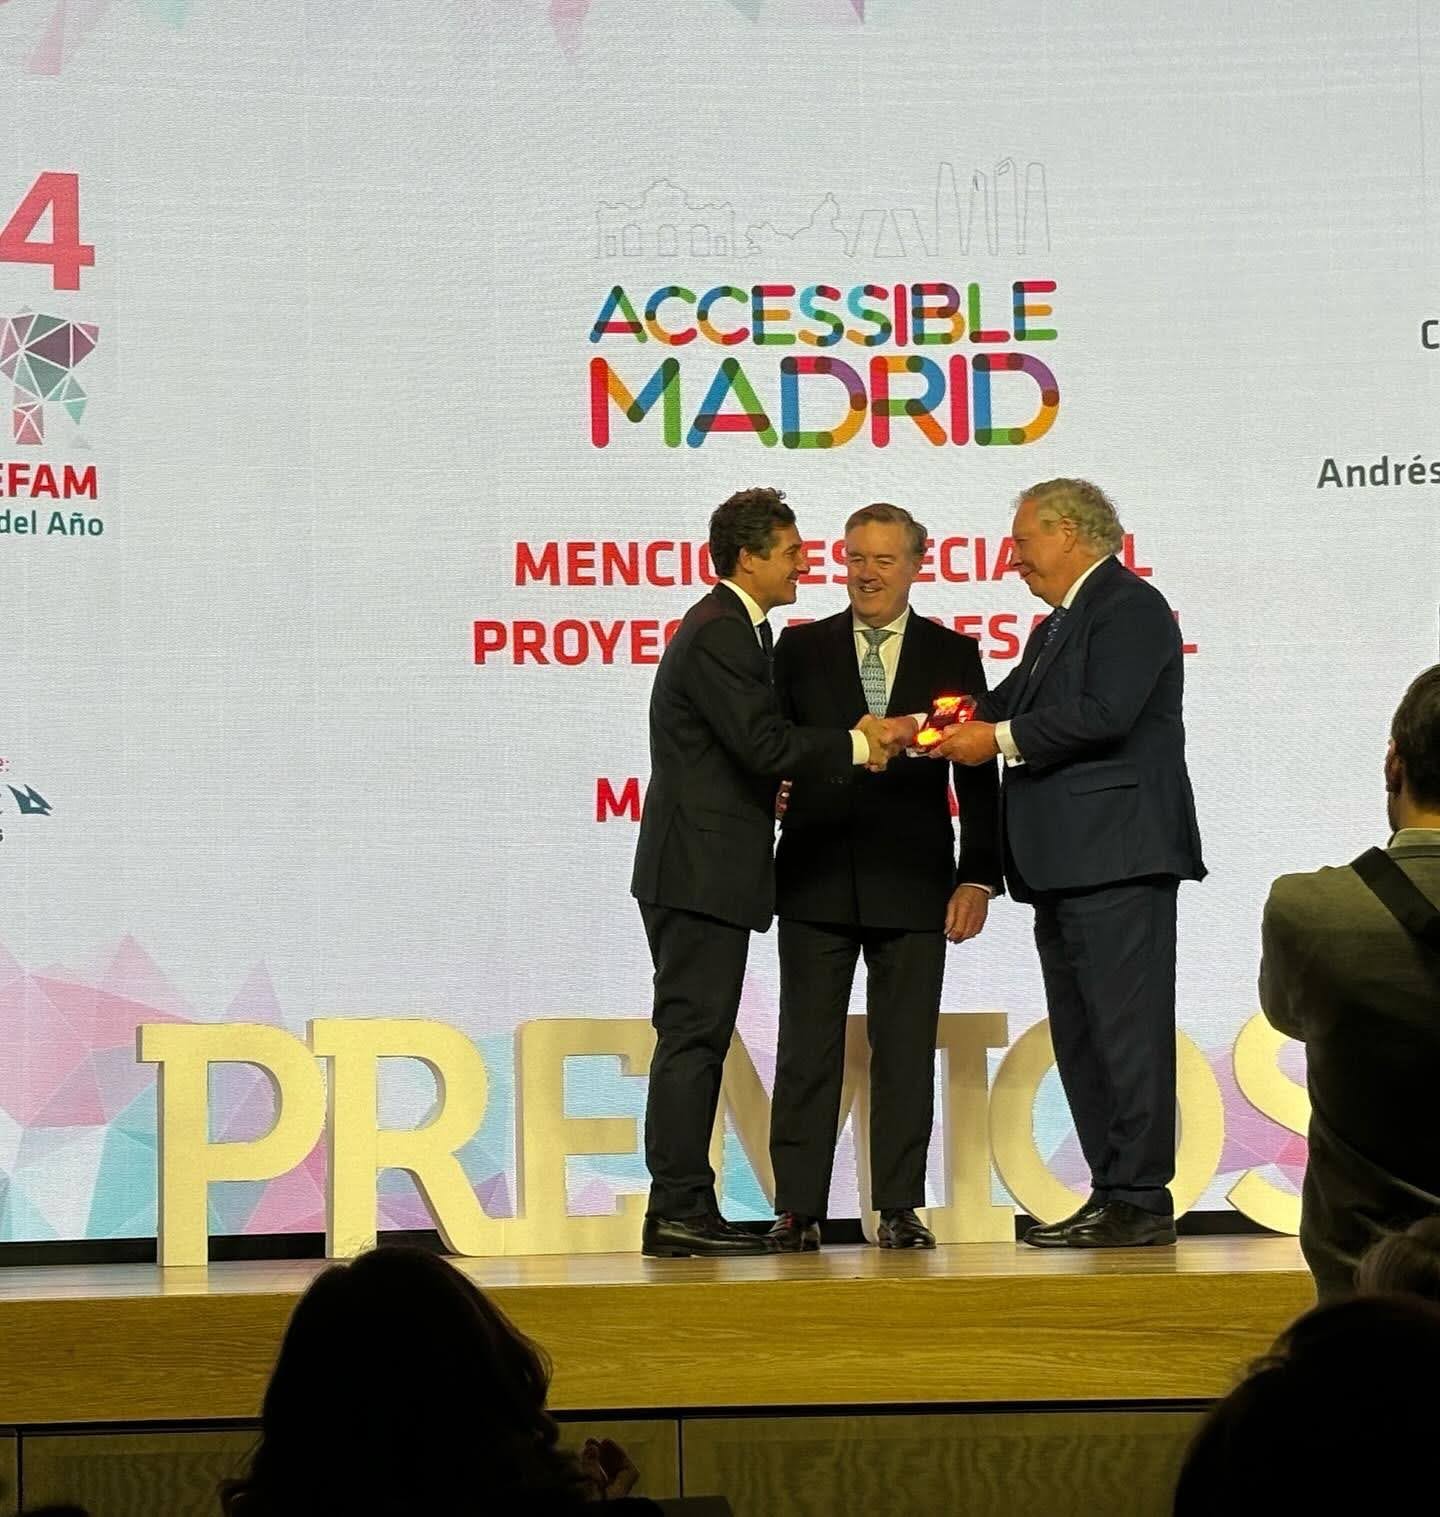 ADEFAM awards Accessible Madrid as the most innovative Madrid business project